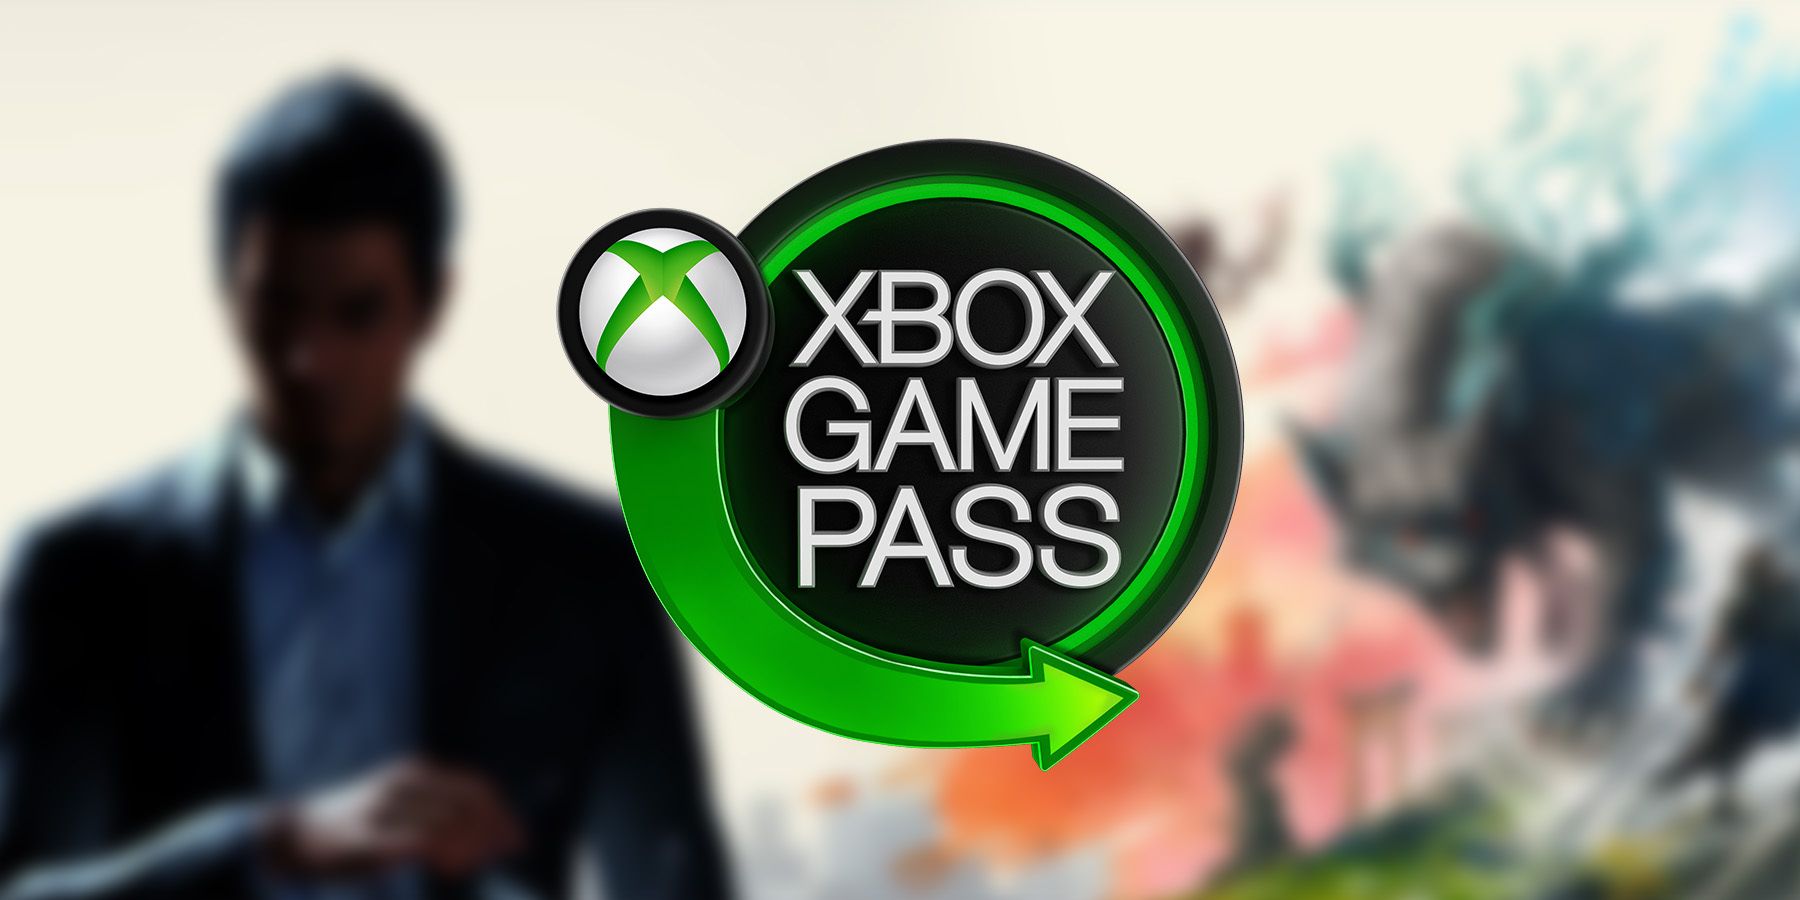 Must-Play Games on Game Pass – November 2023